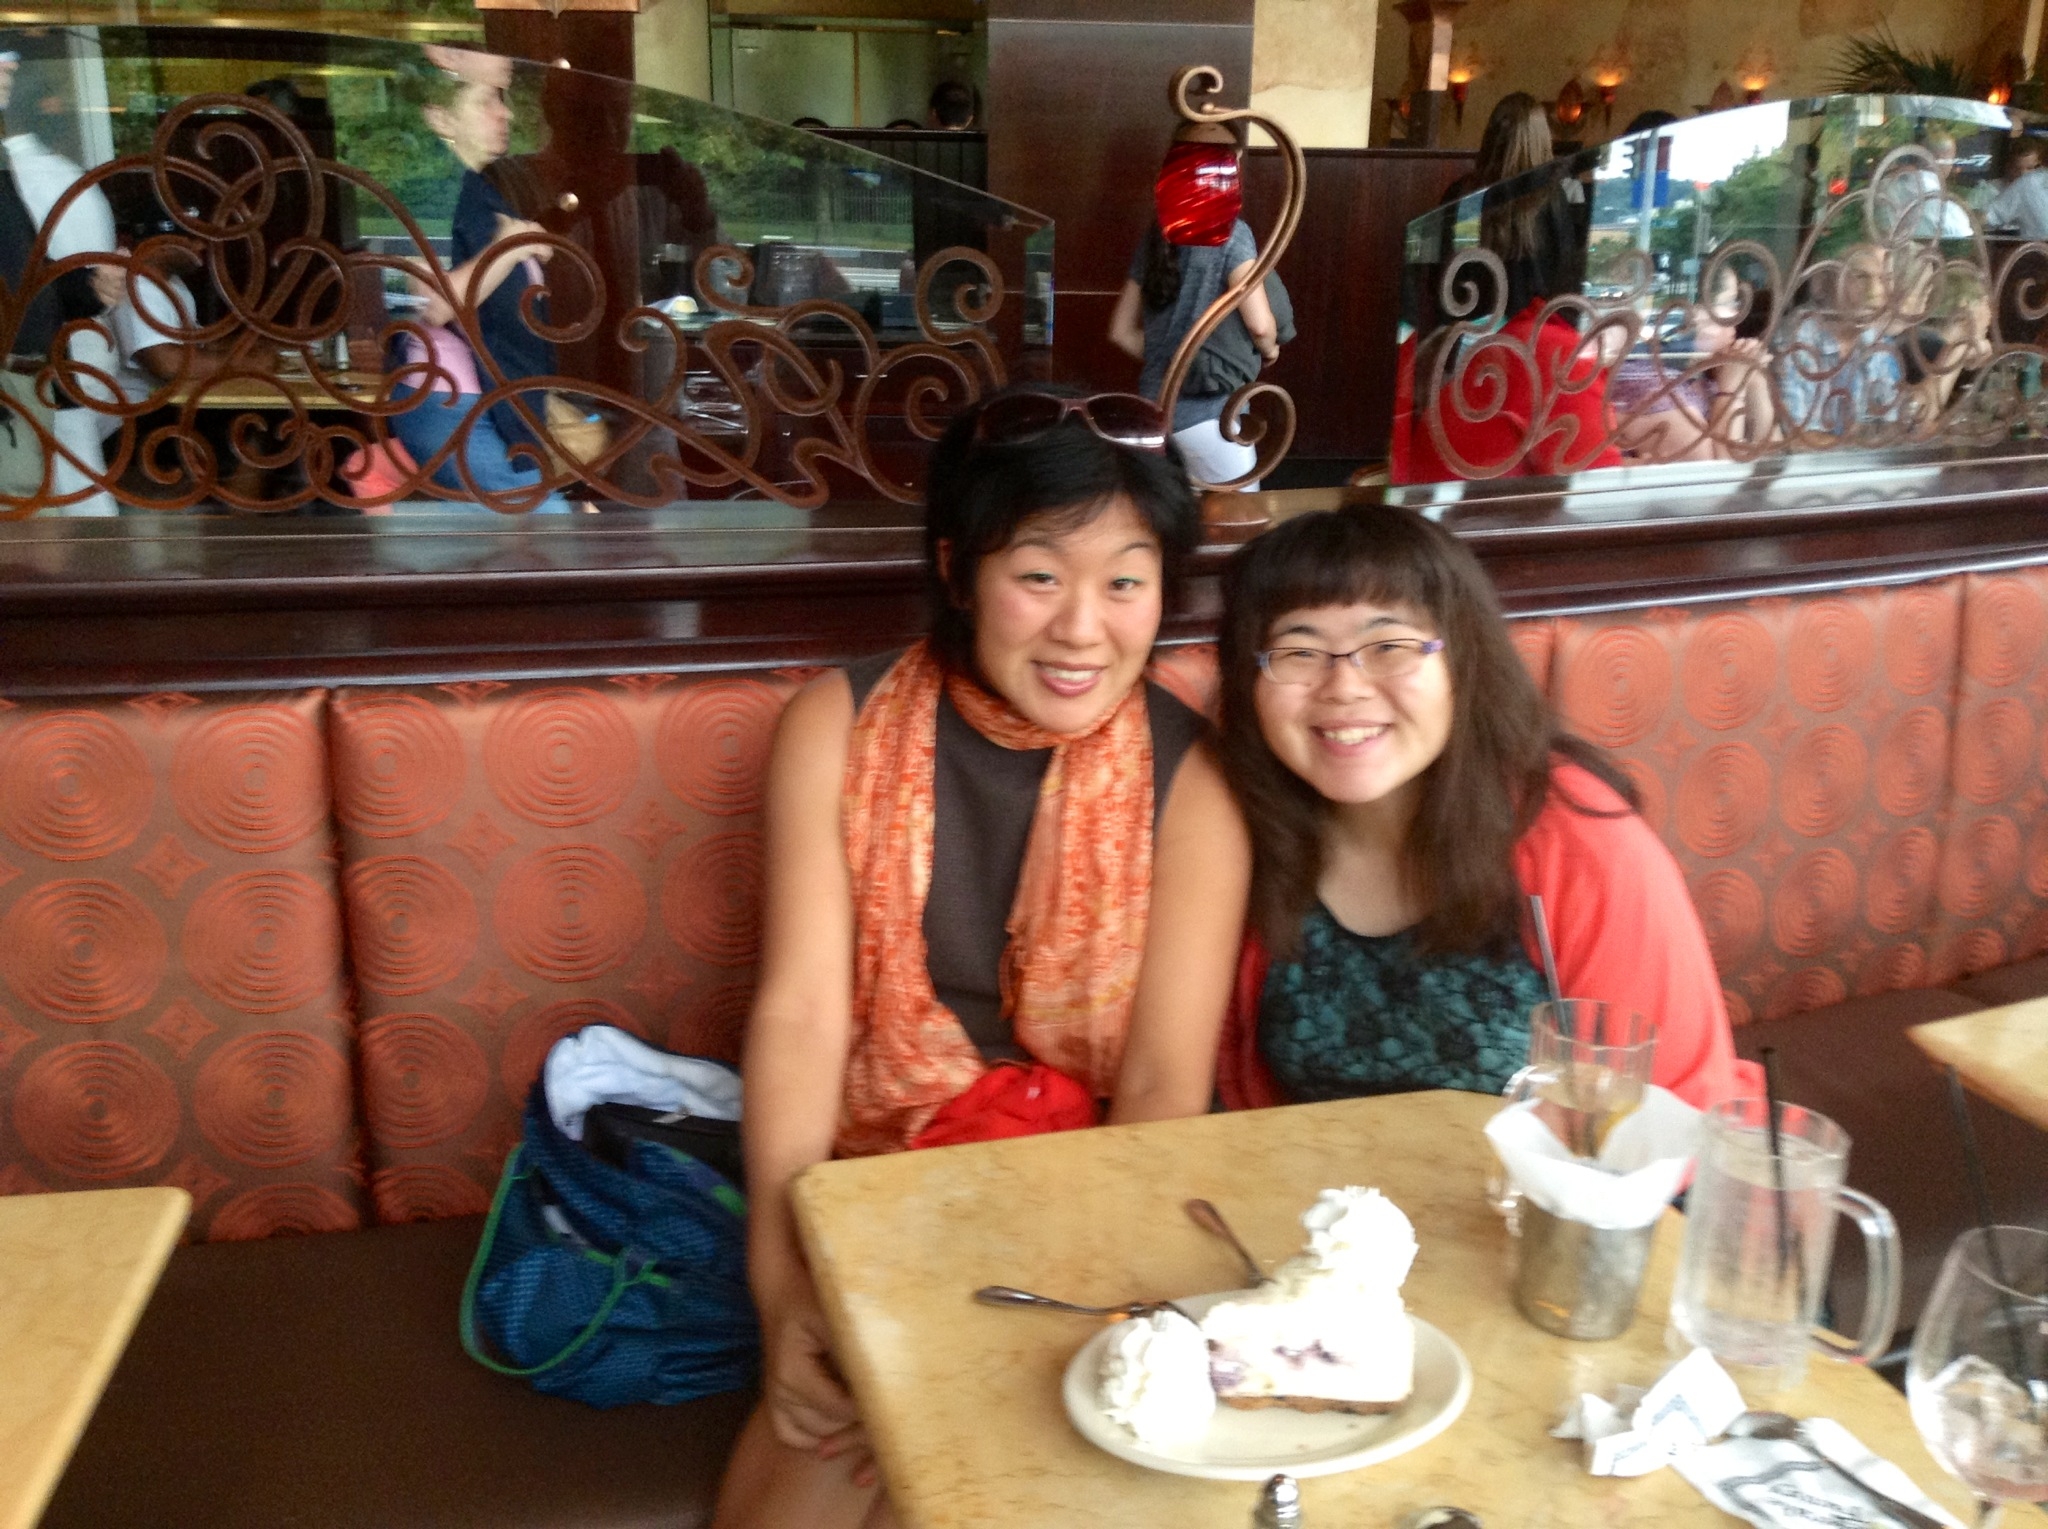 Reuniting with my sister over cheesecake. Photo: Amy Wu